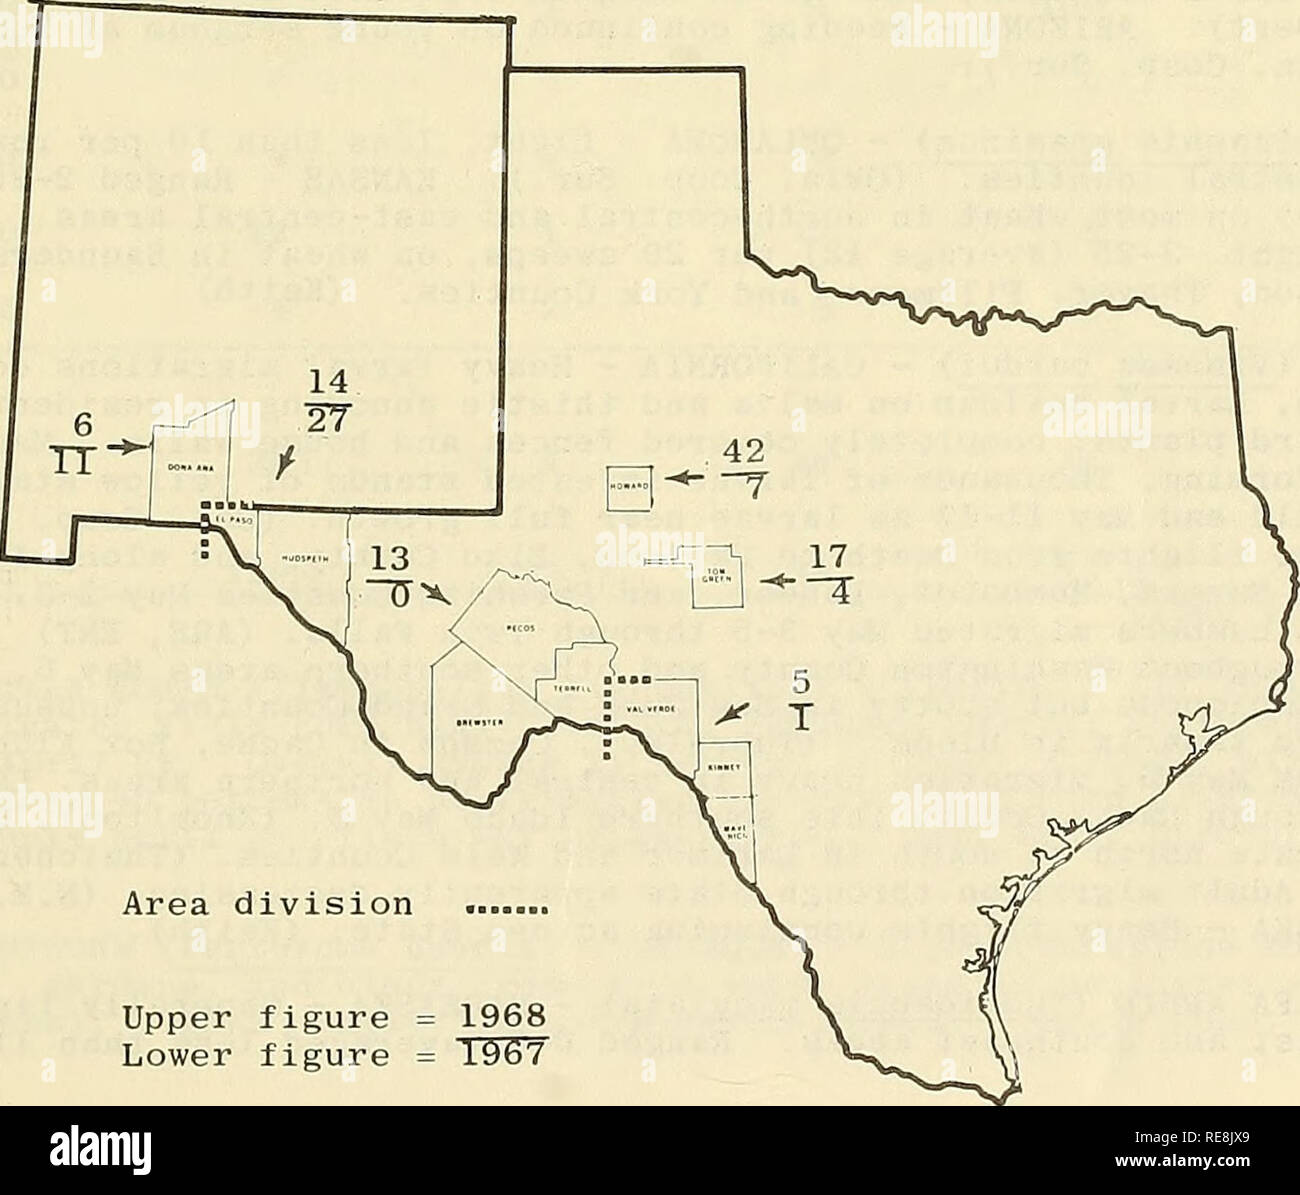 . Cooperative economic insect report. Beneficial insects; Insect pests. - 409 SPECIAL INSECTS OF REGIONAL SIGNIFICANCE Potato Psyllld Survey, Spring Breeding Areas of Texas and Southeastern New Mexico The potato psyllid (Paratrioza cockerelli) survey in Texas and southeastern New Mexico was completed March 28, 1968. Unusual amounts of winter moisture occurred throughout the survey area. Lycium host plants are leafy, lush, and in better than average condition in all locations. Potato psyllid counts increased considerably in the Big Spring, San Angelo, Del Rio, and Marathon-Sanderson areas. Popu Stock Photo